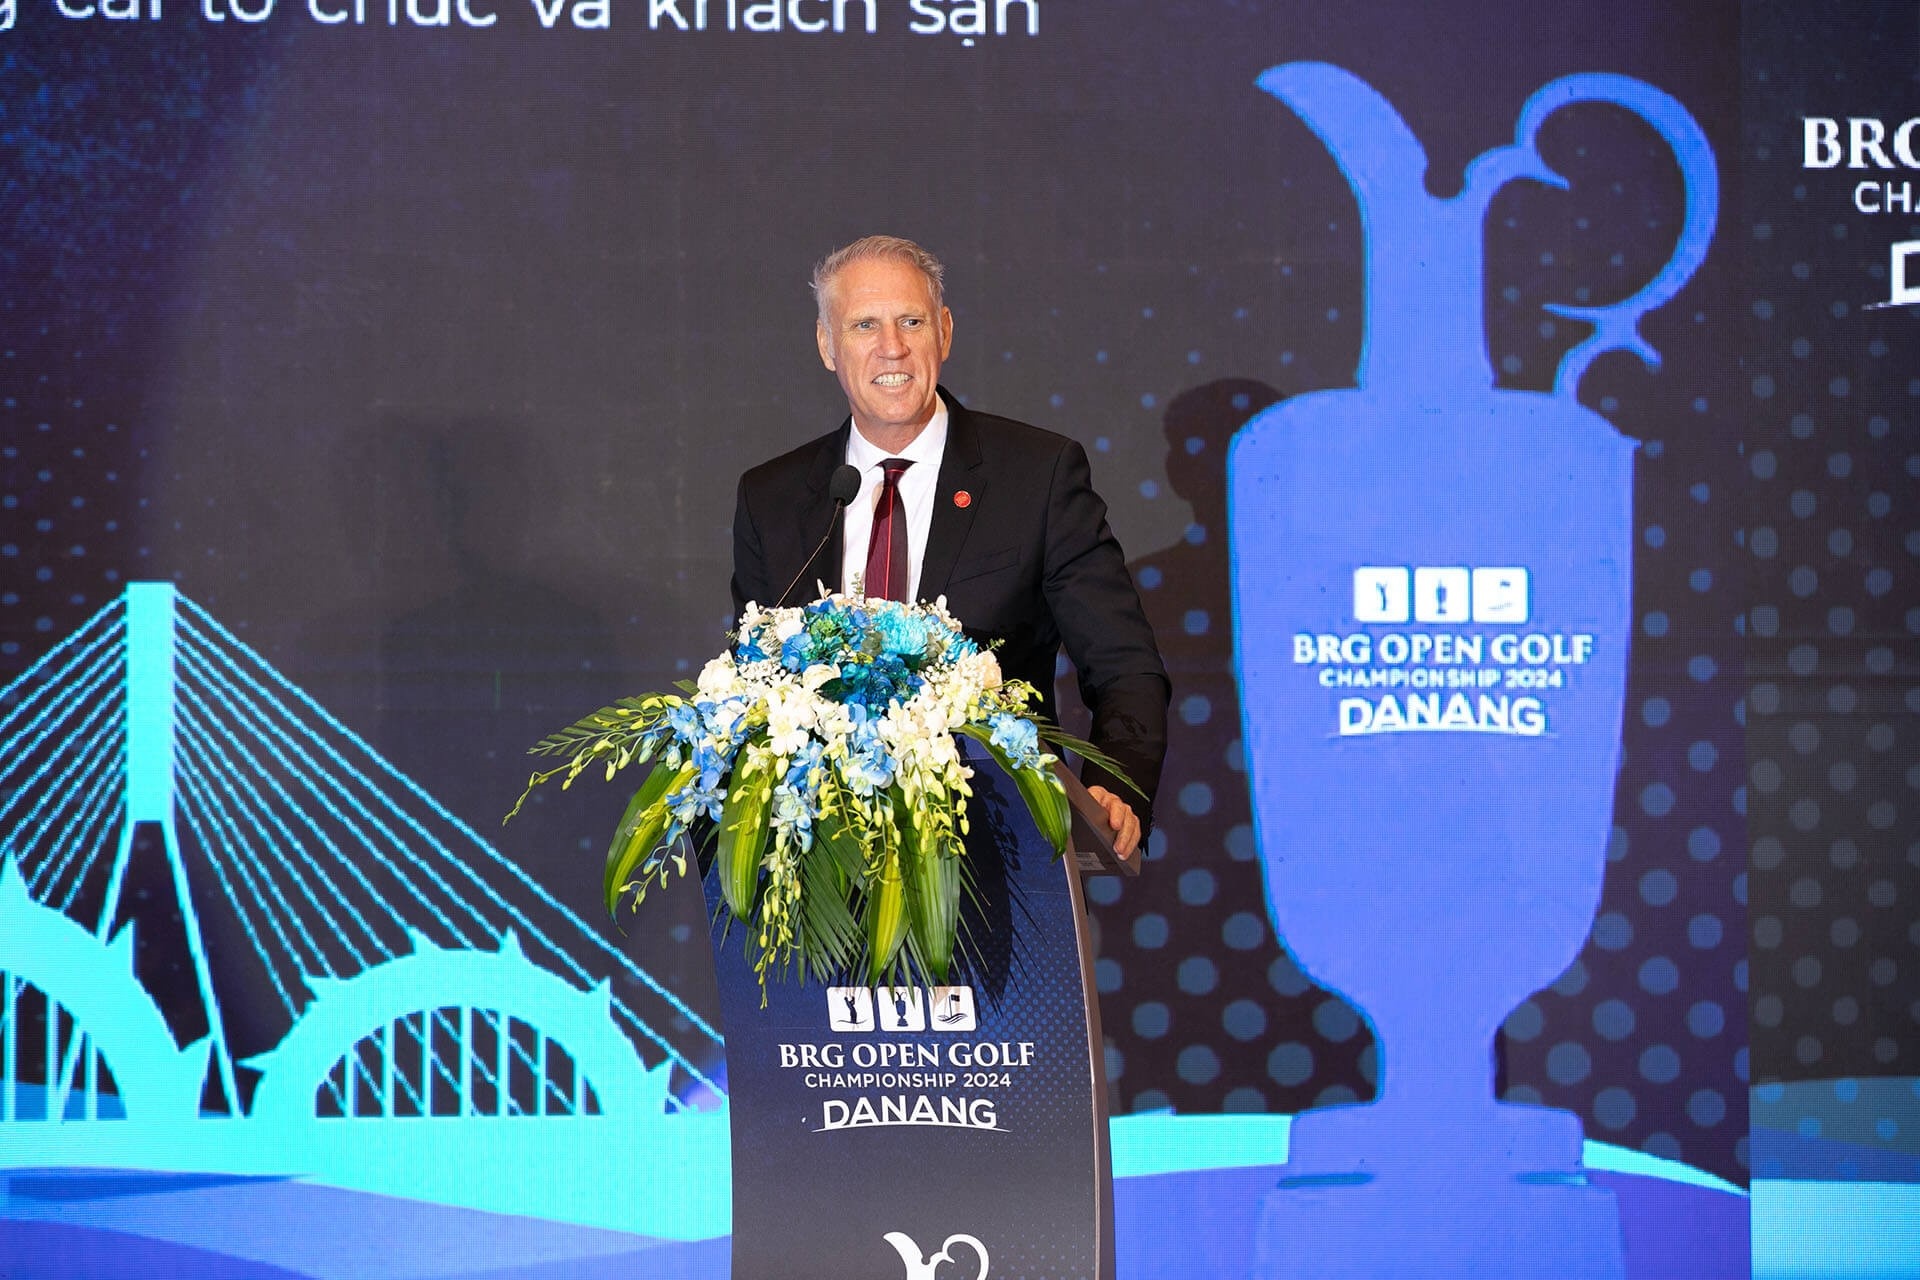 BRG Open Golf Championship Danang 2024 set for launching late August